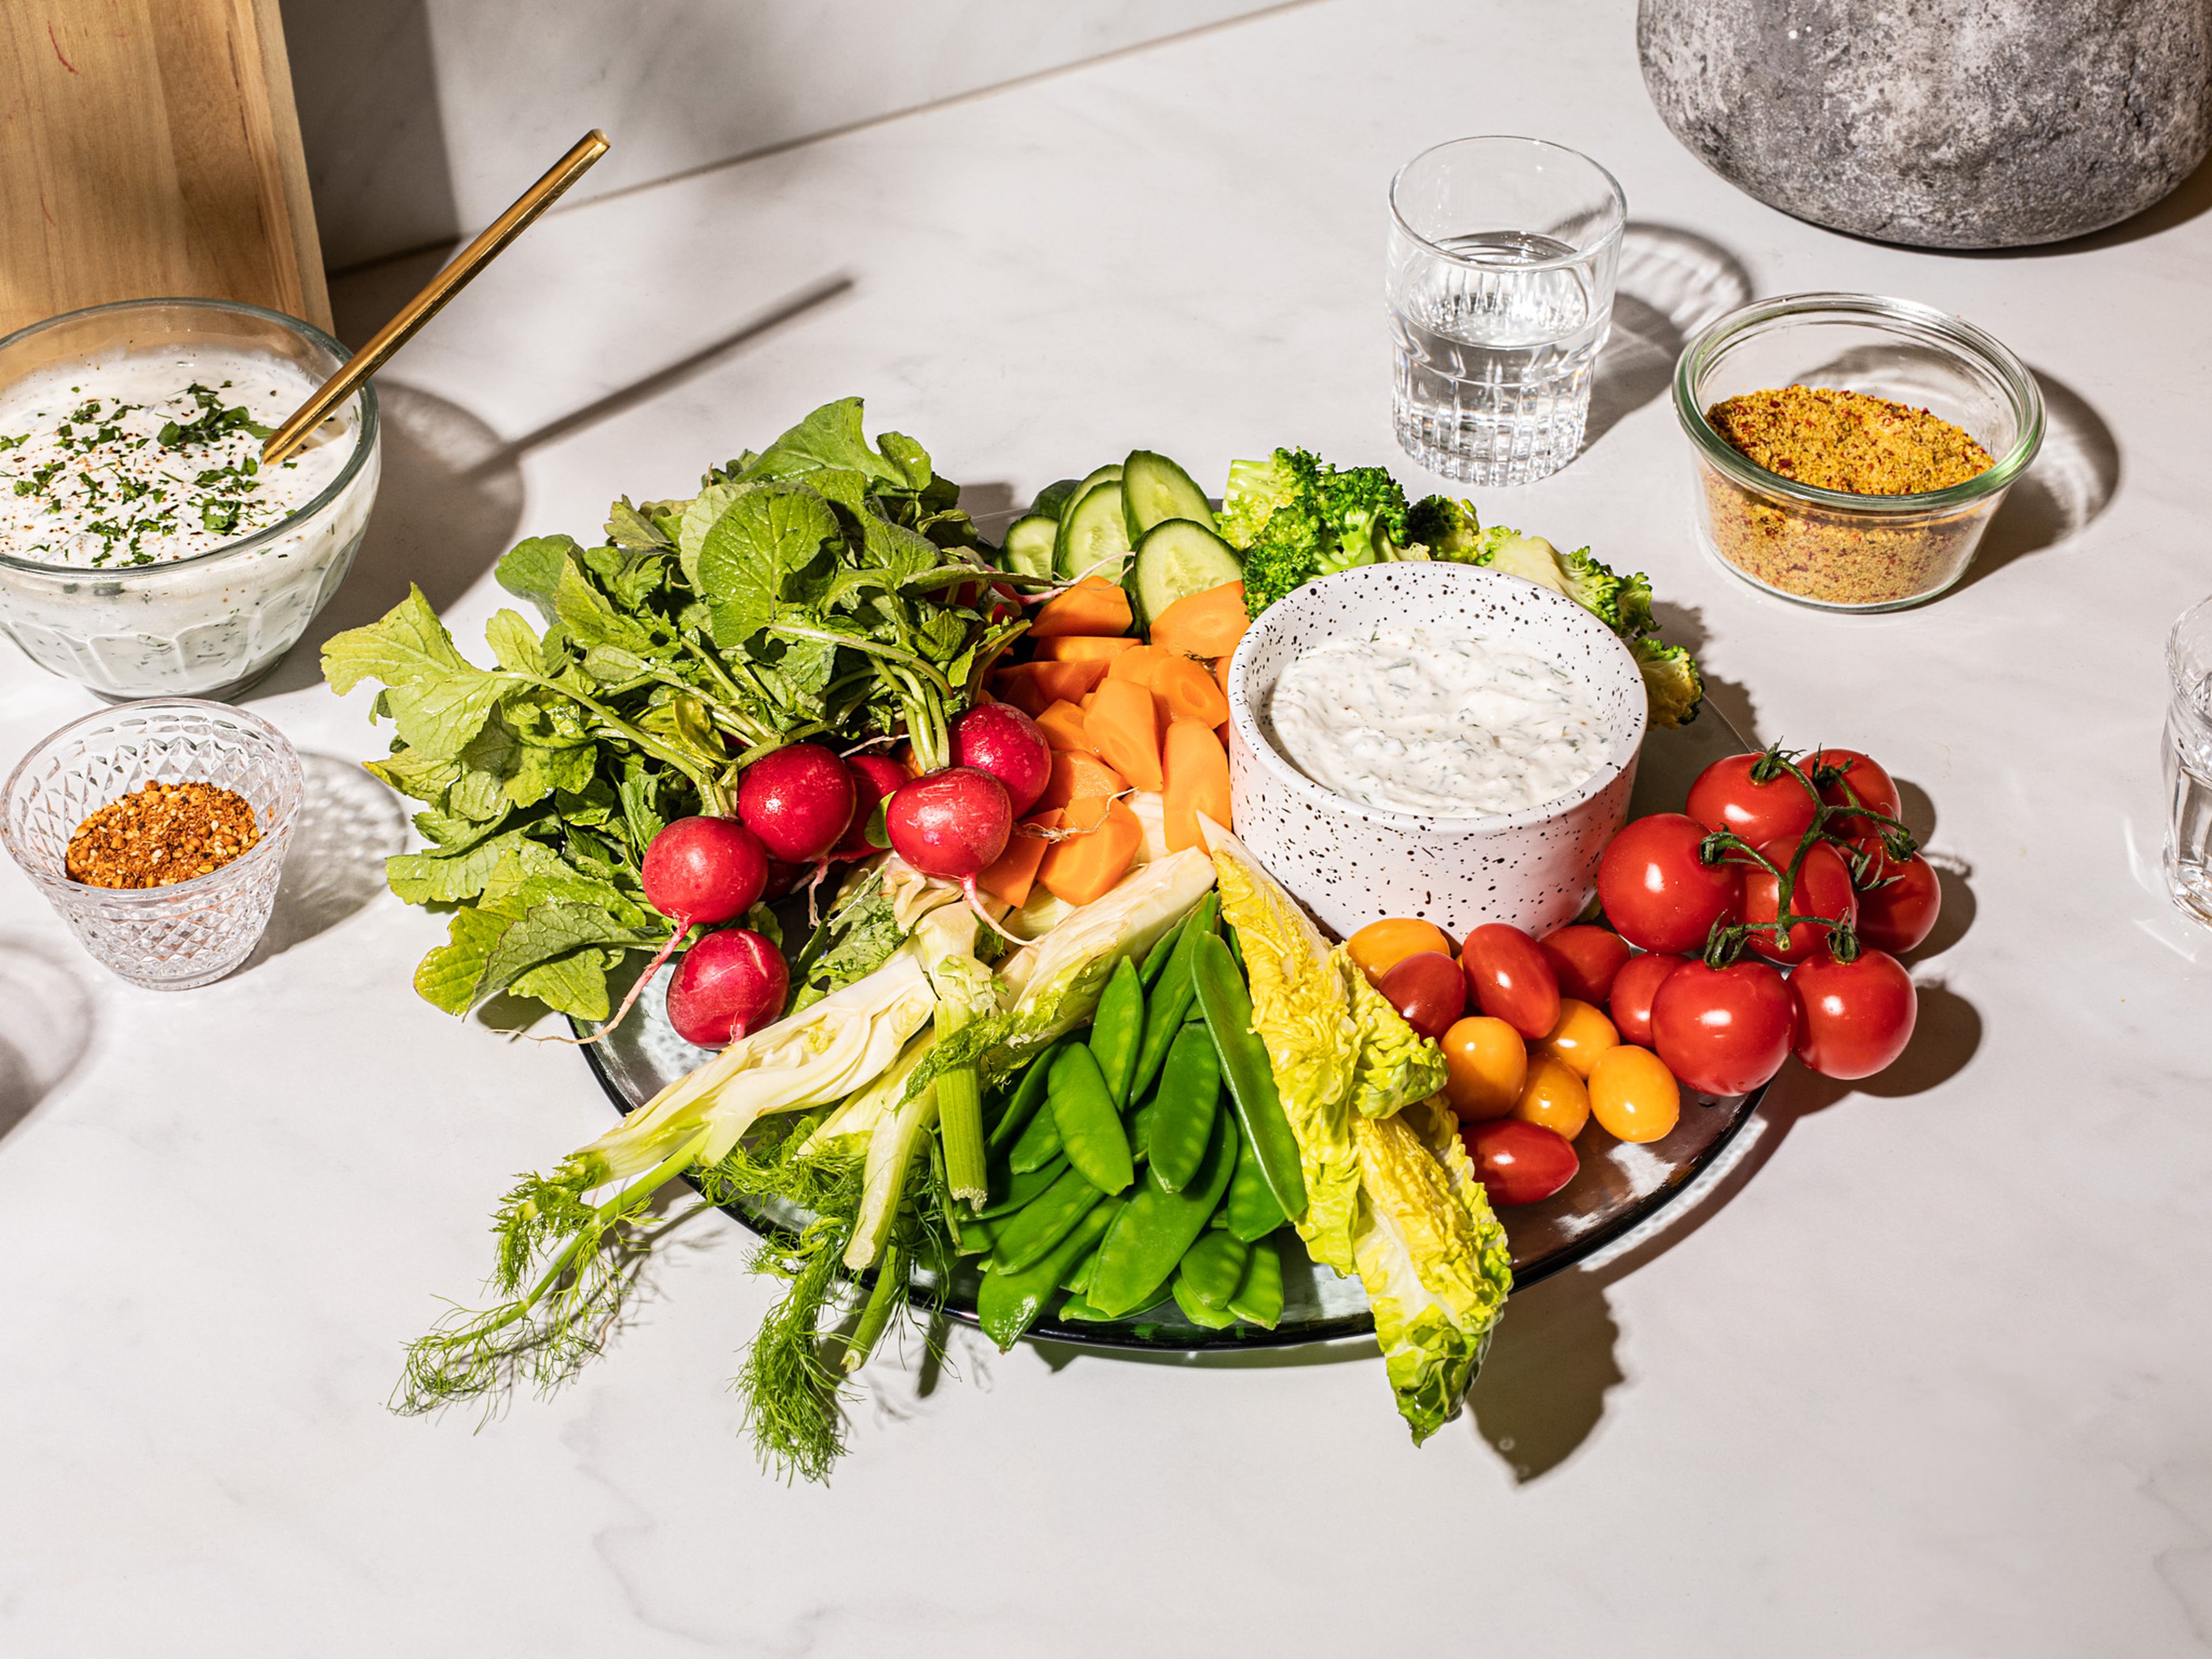 How to Make Crudités—A Salad You Eat With Your Hands